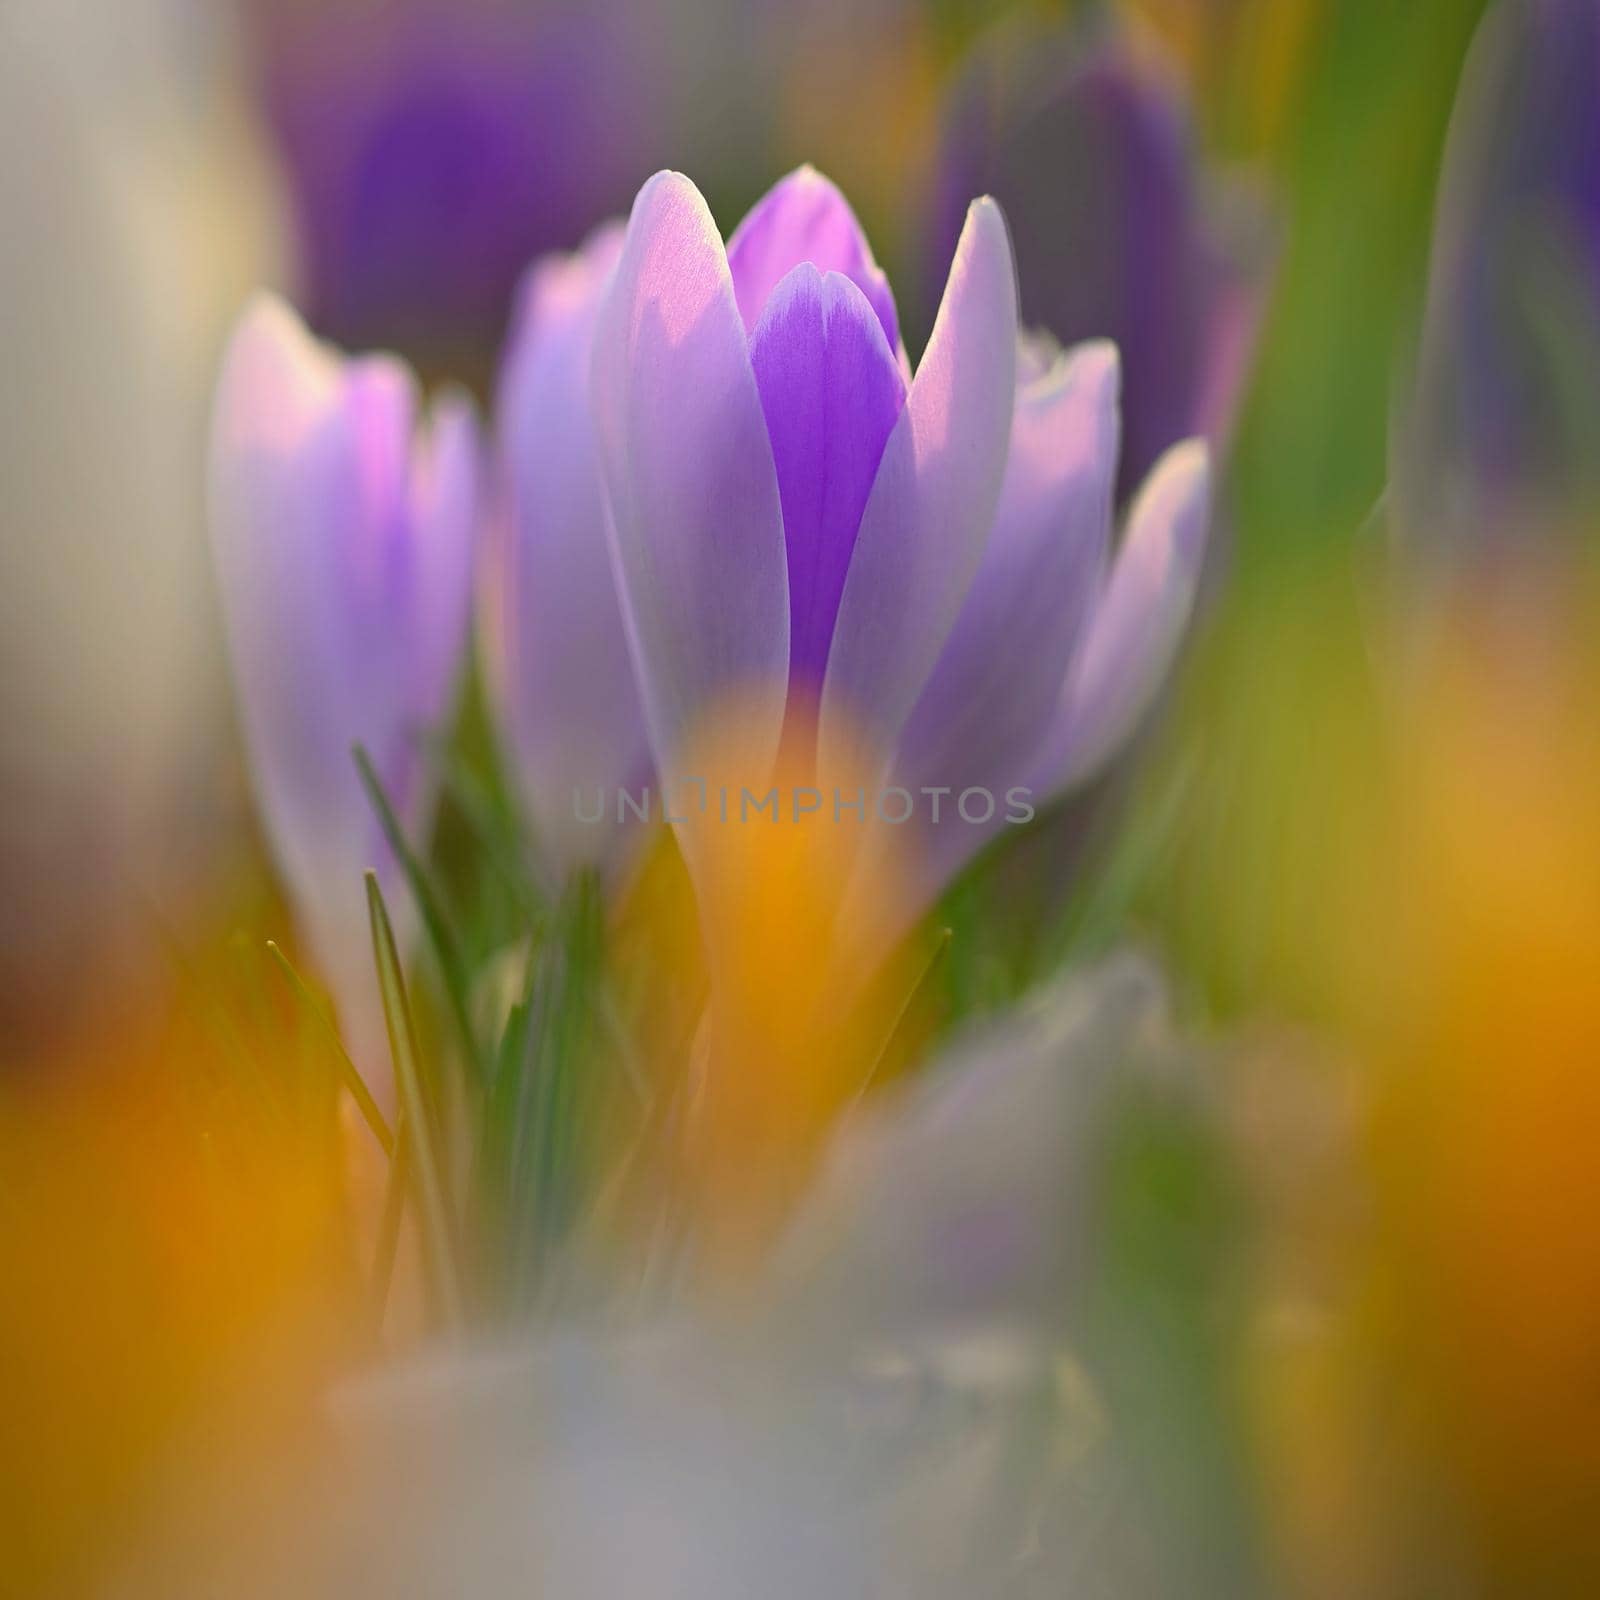 Spring background with flowers. Nature and delicate photo with details of blooming colorful crocuses in spring time.(Crocus vernus) by Montypeter